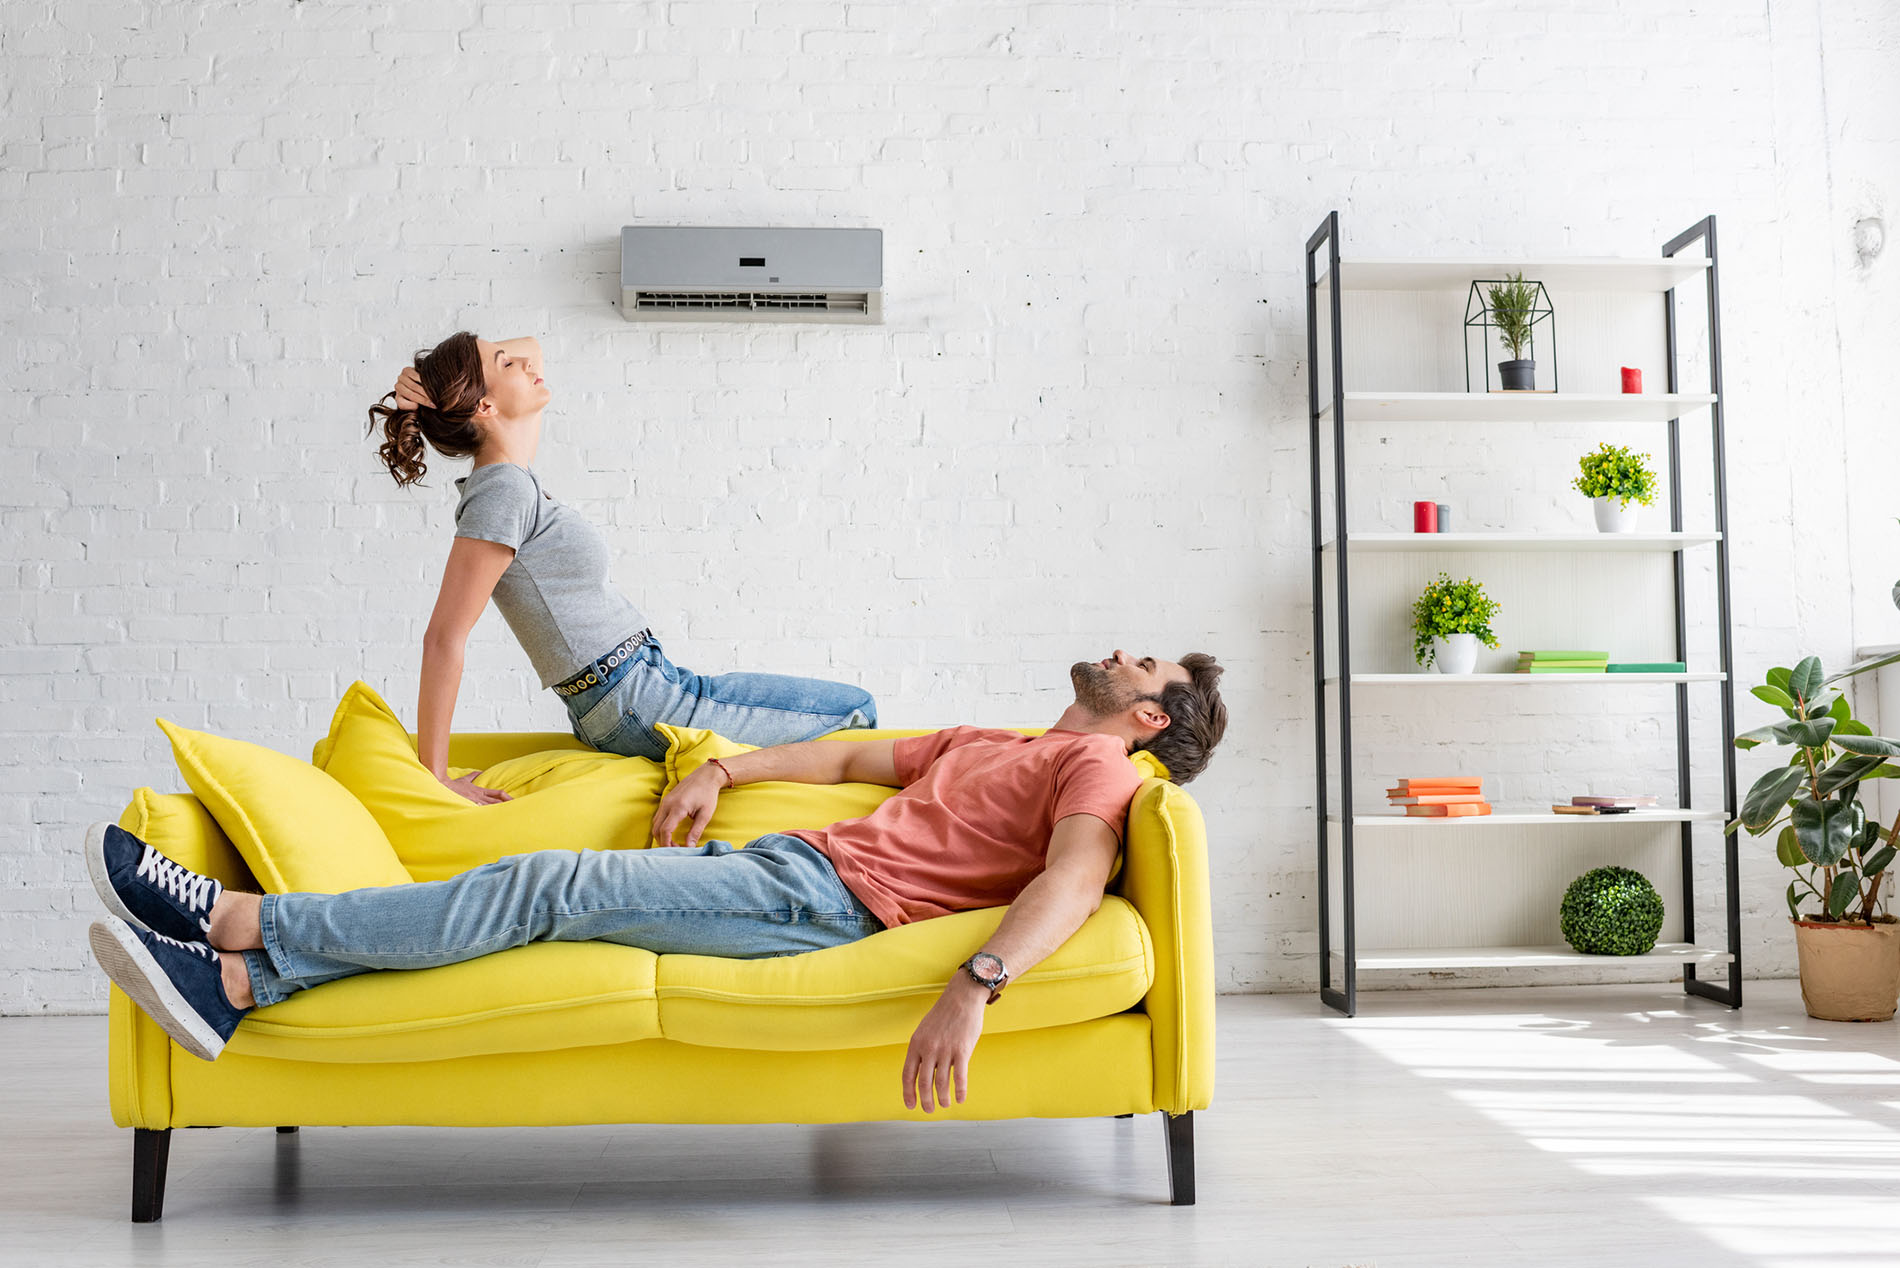 young man and woman resting on yellow sofa under ductless air conditioner at home